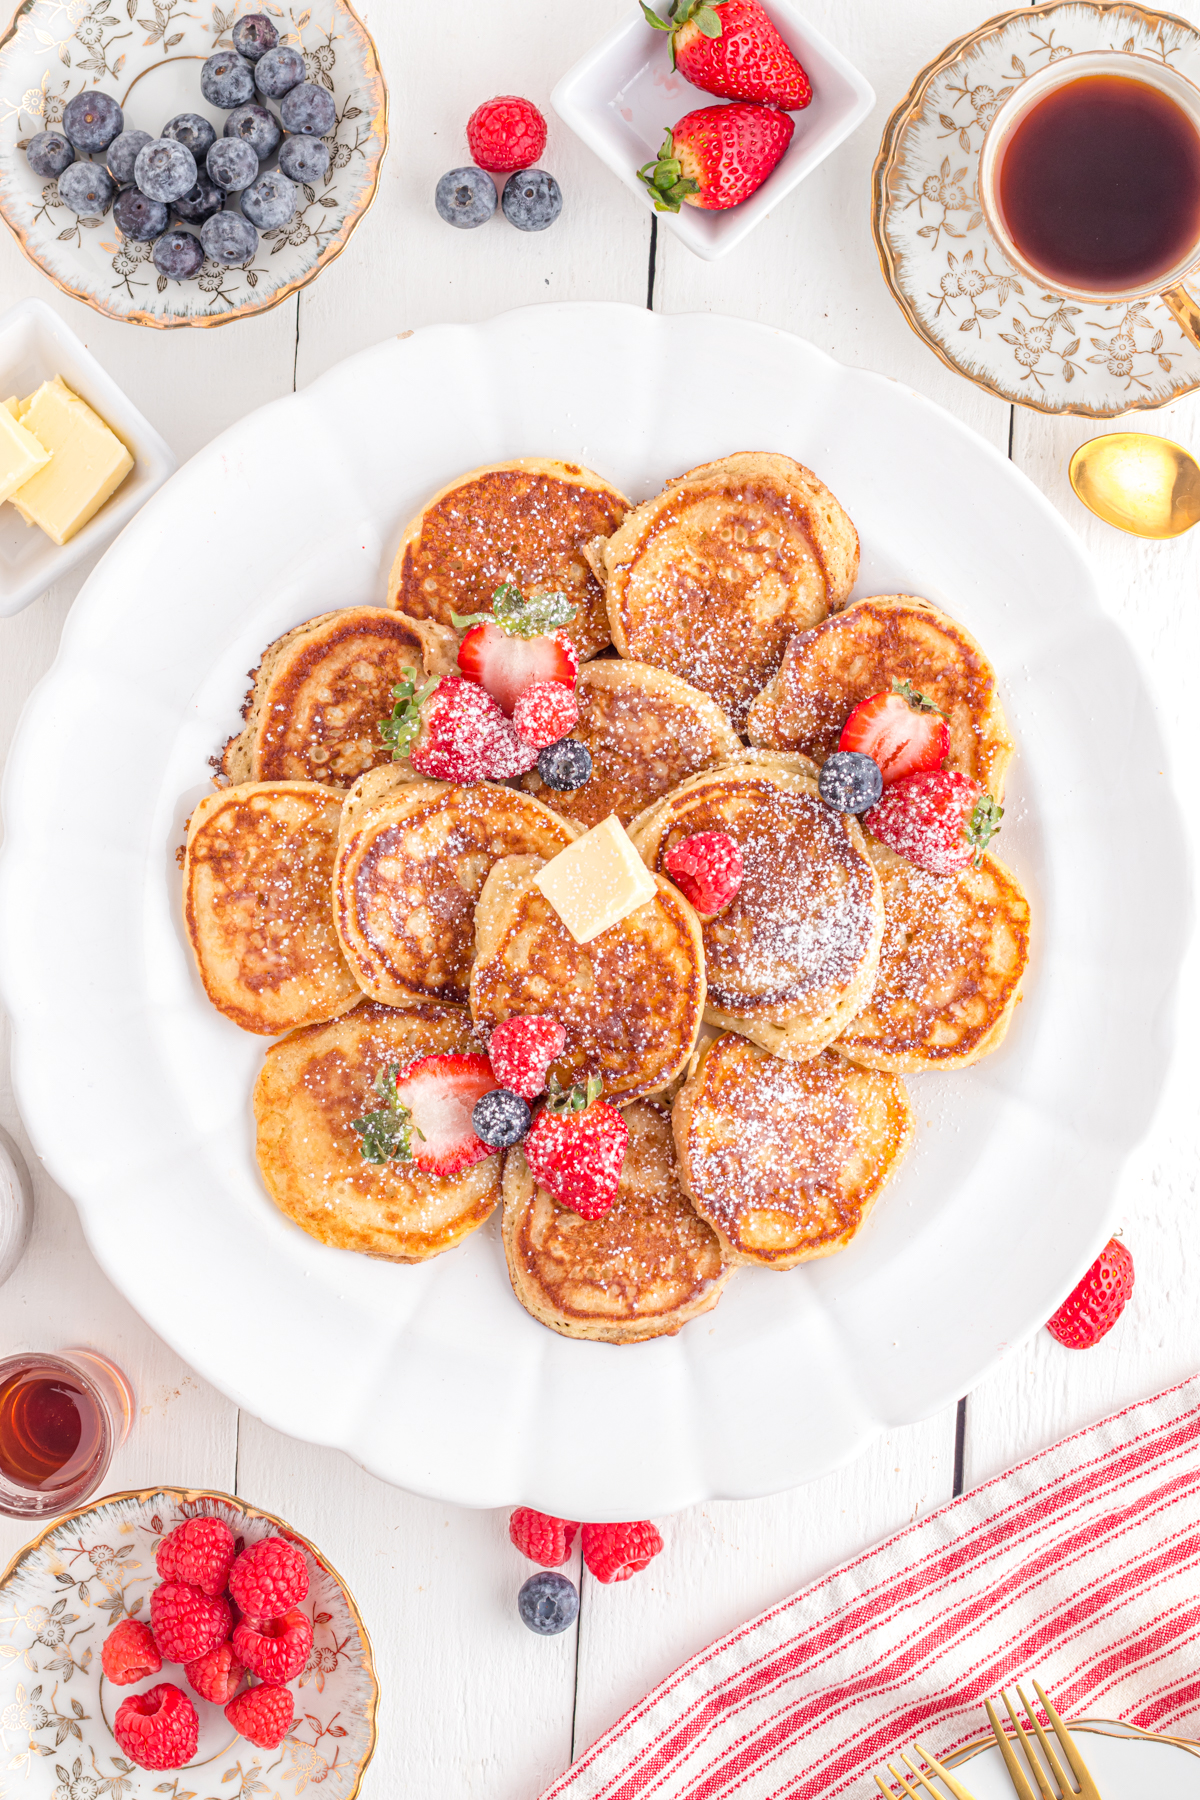 Silver dollar pancakes on round platter on table with berries.